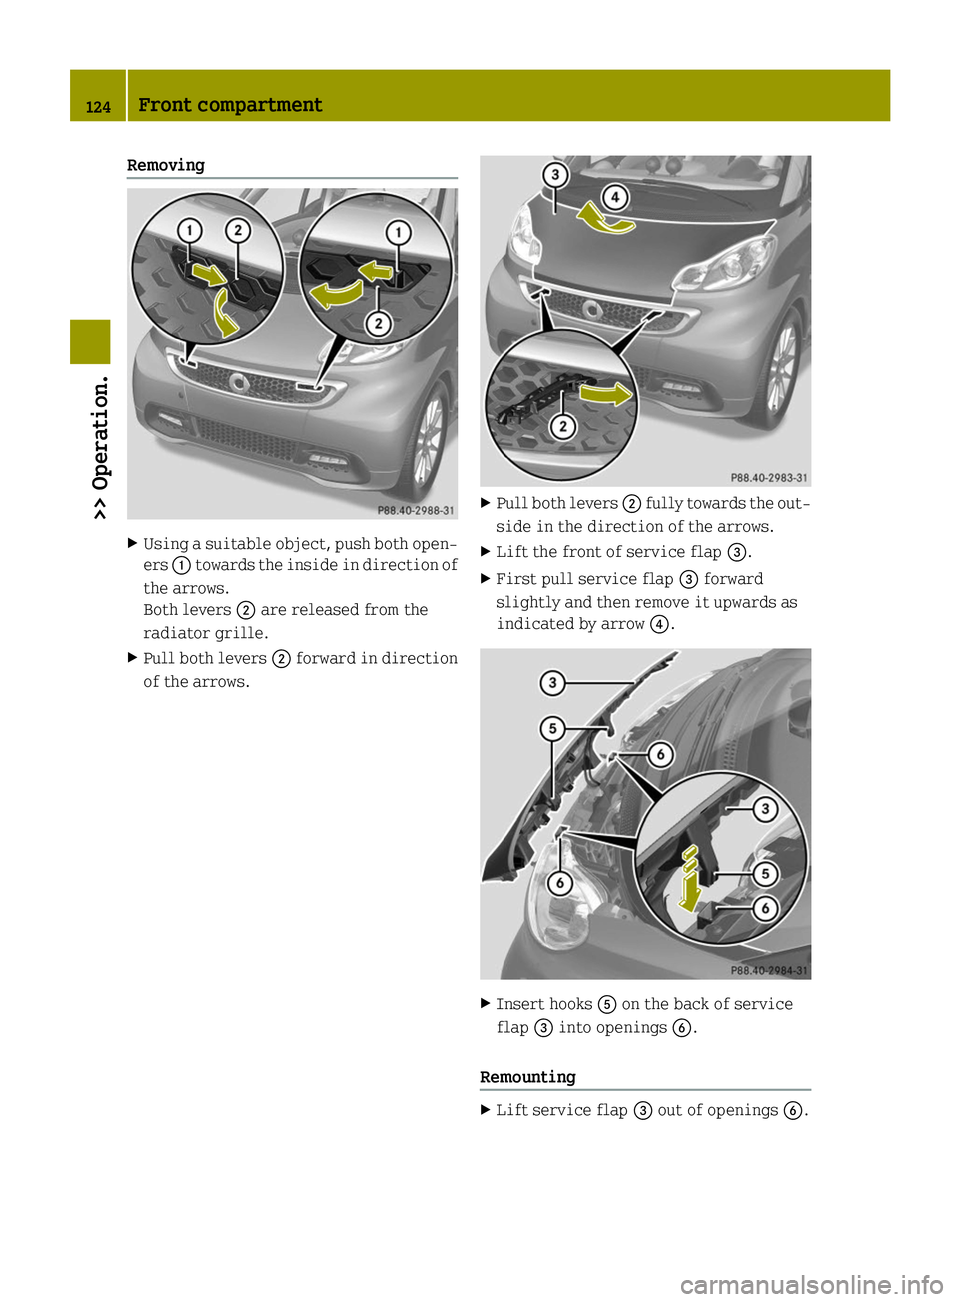 SMART FORTWO COUPE ELECTRIC DRIVE 2014  Owners Manual Removing
X
Using a suitable object, push both open-
ers 0043towards the inside in direction of
the arrows.
Both levers 0044are released from the
radiator grille.
X Pull both levers 0044forward in dire